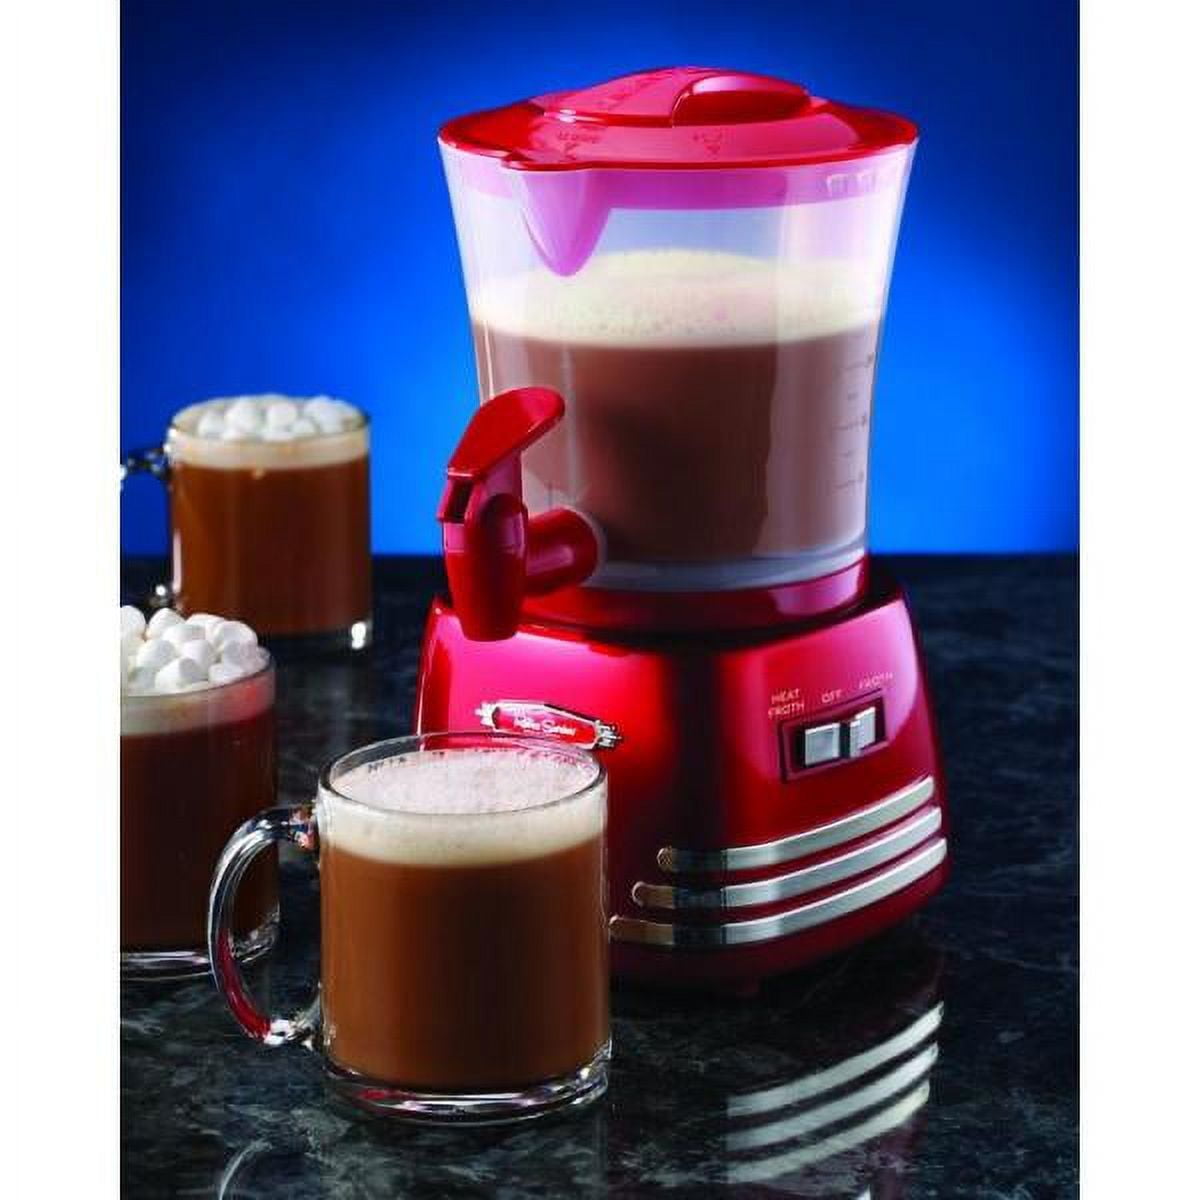 Nostalgia Retro Frother and Hot Chocolate Maker and Dispenser, 32 Oz, for  Coffees, Lattes, Cappuccinos, Red